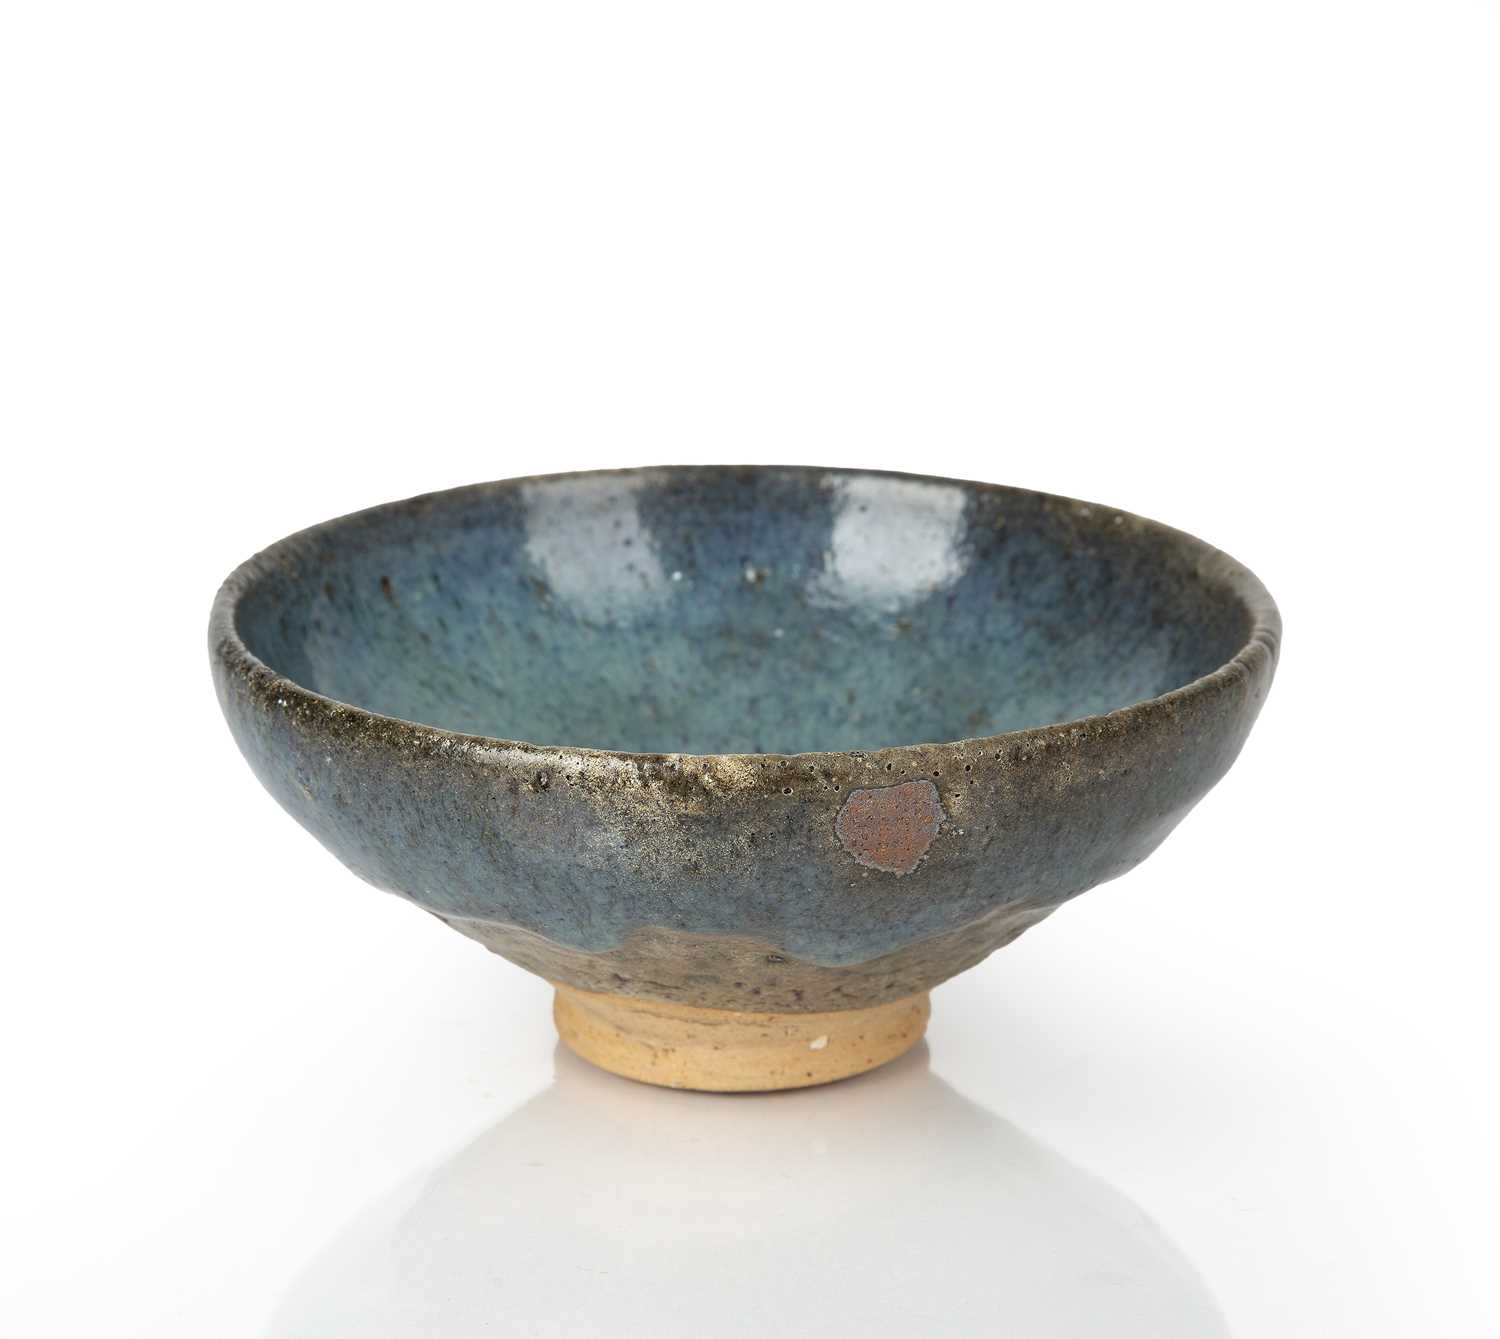 Shiwan style bowl Chinese, 17th/18th Century decorated with a robin's egg glaze all over, of a